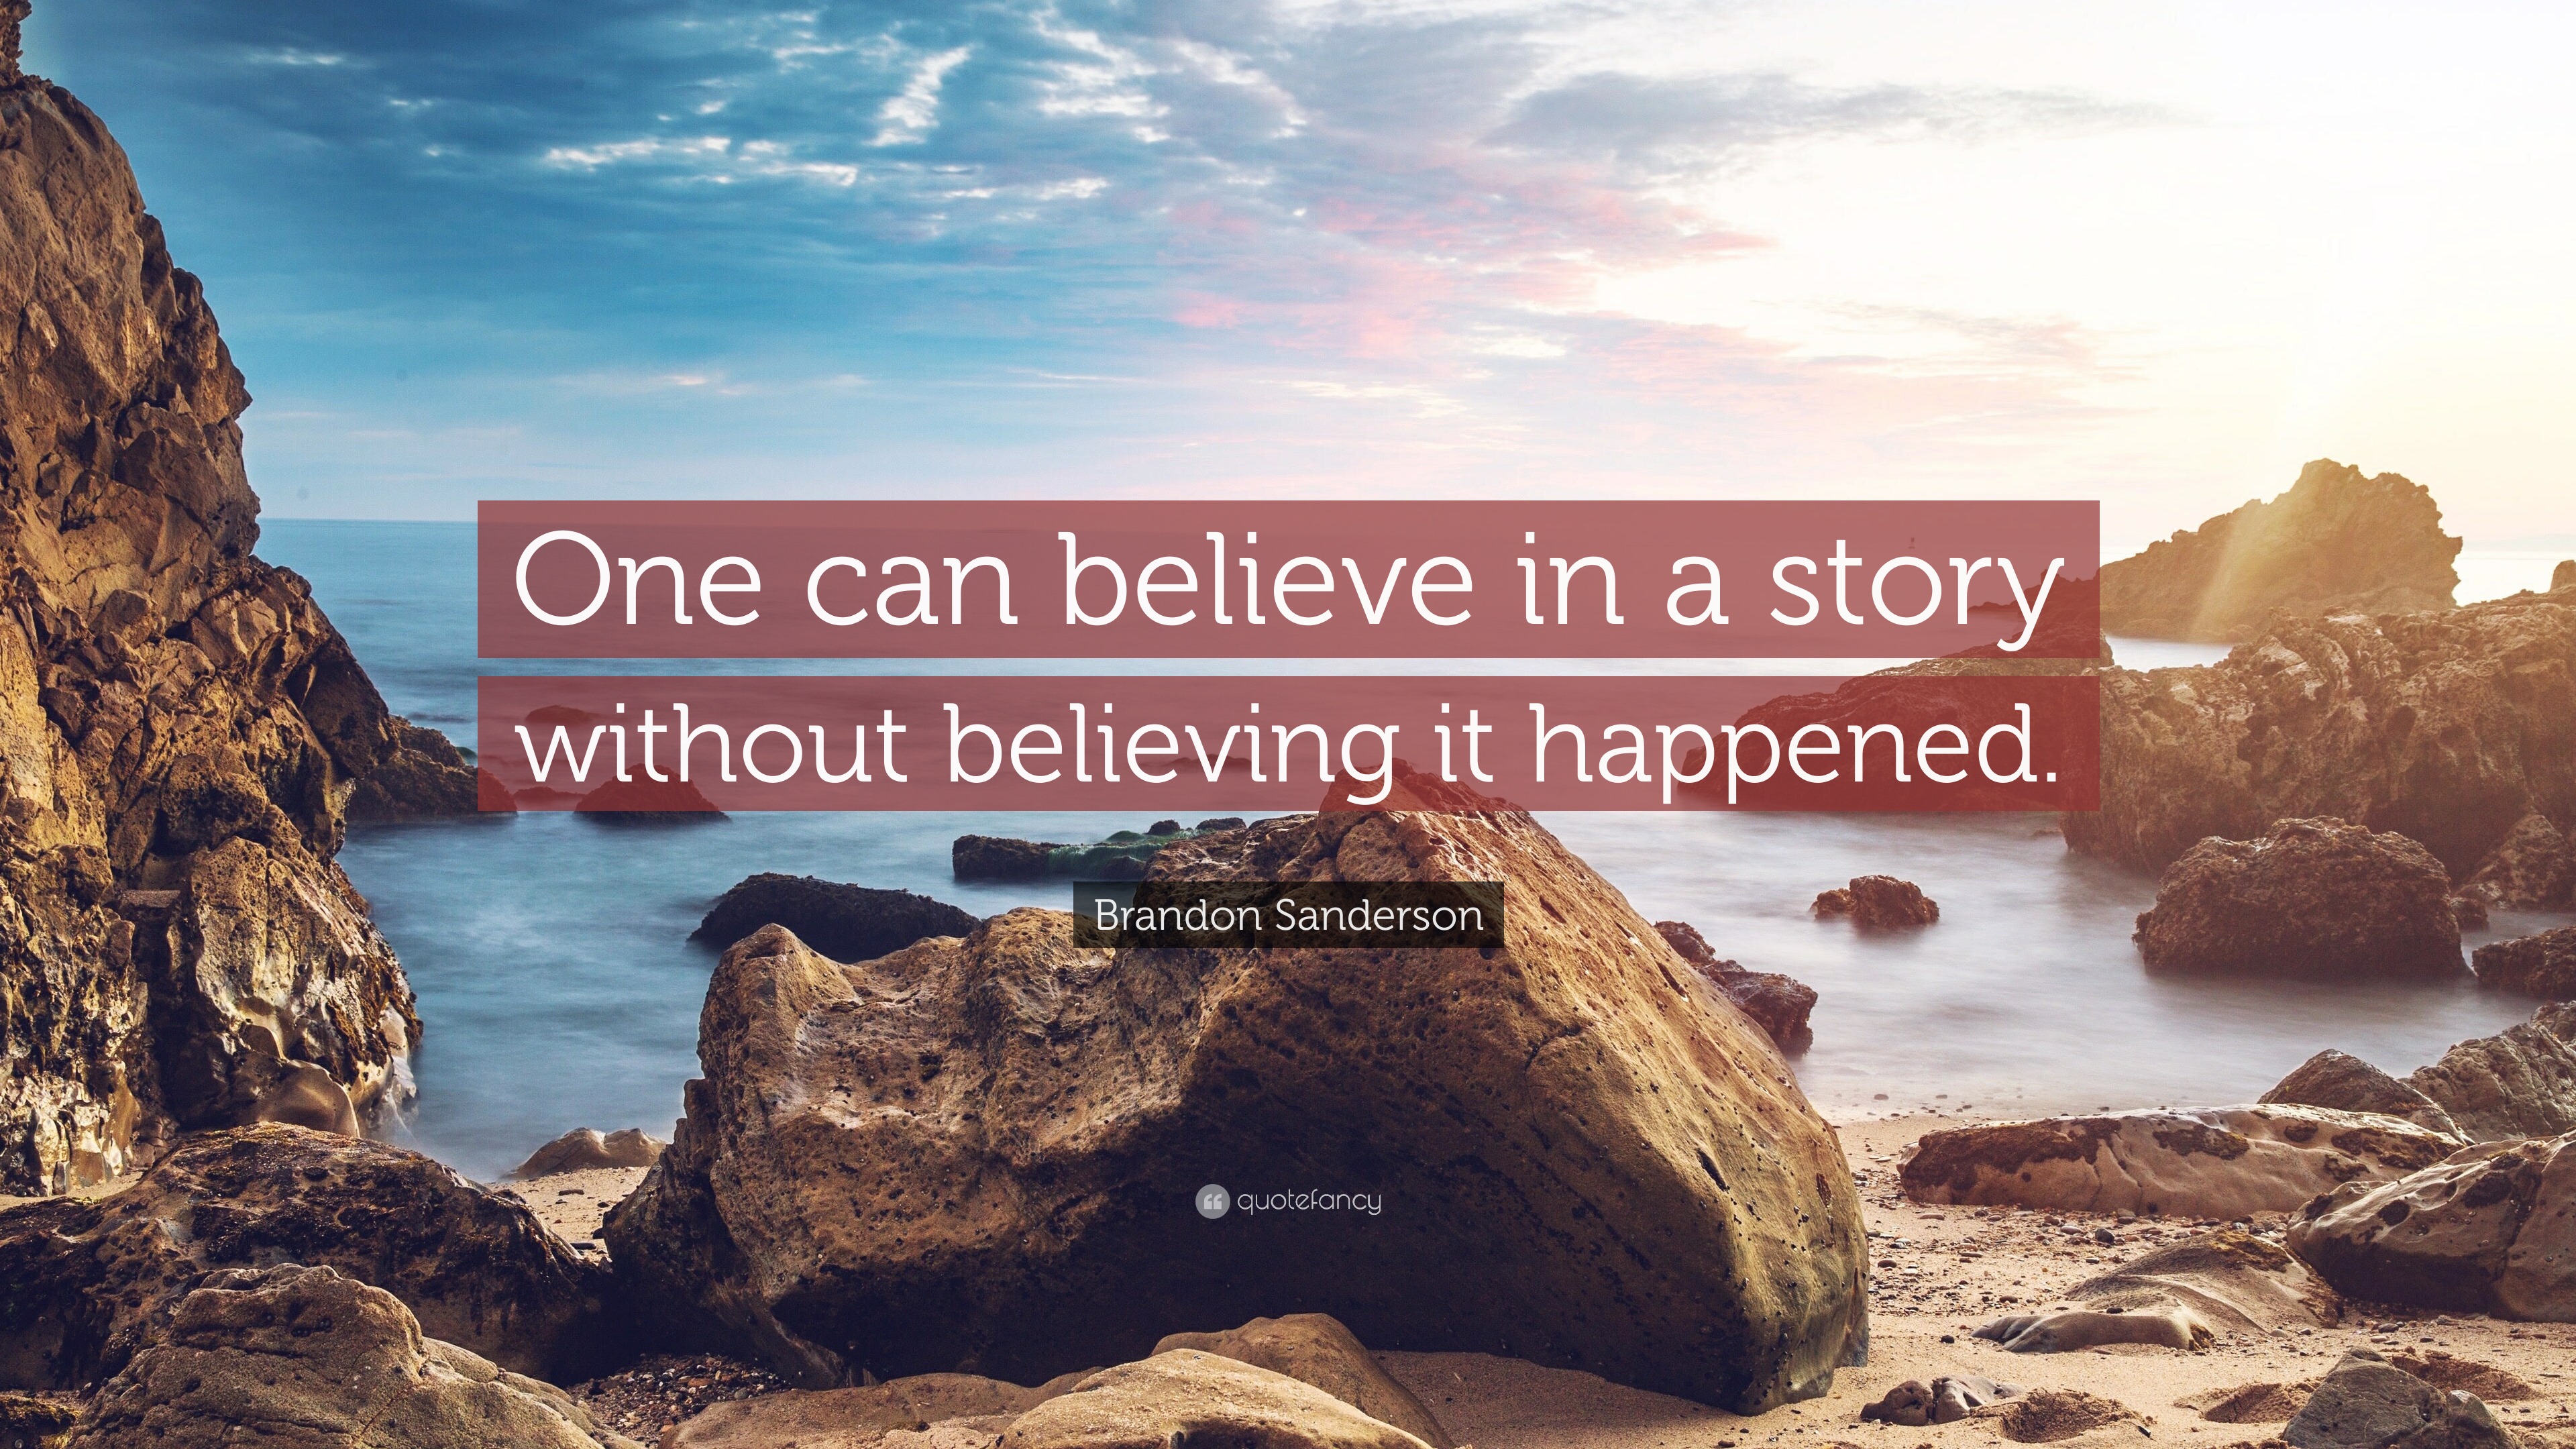 https://quotefancy.com/media/wallpaper/3840x2160/6370990-Brandon-Sanderson-Quote-One-can-believe-in-a-story-without.jpg